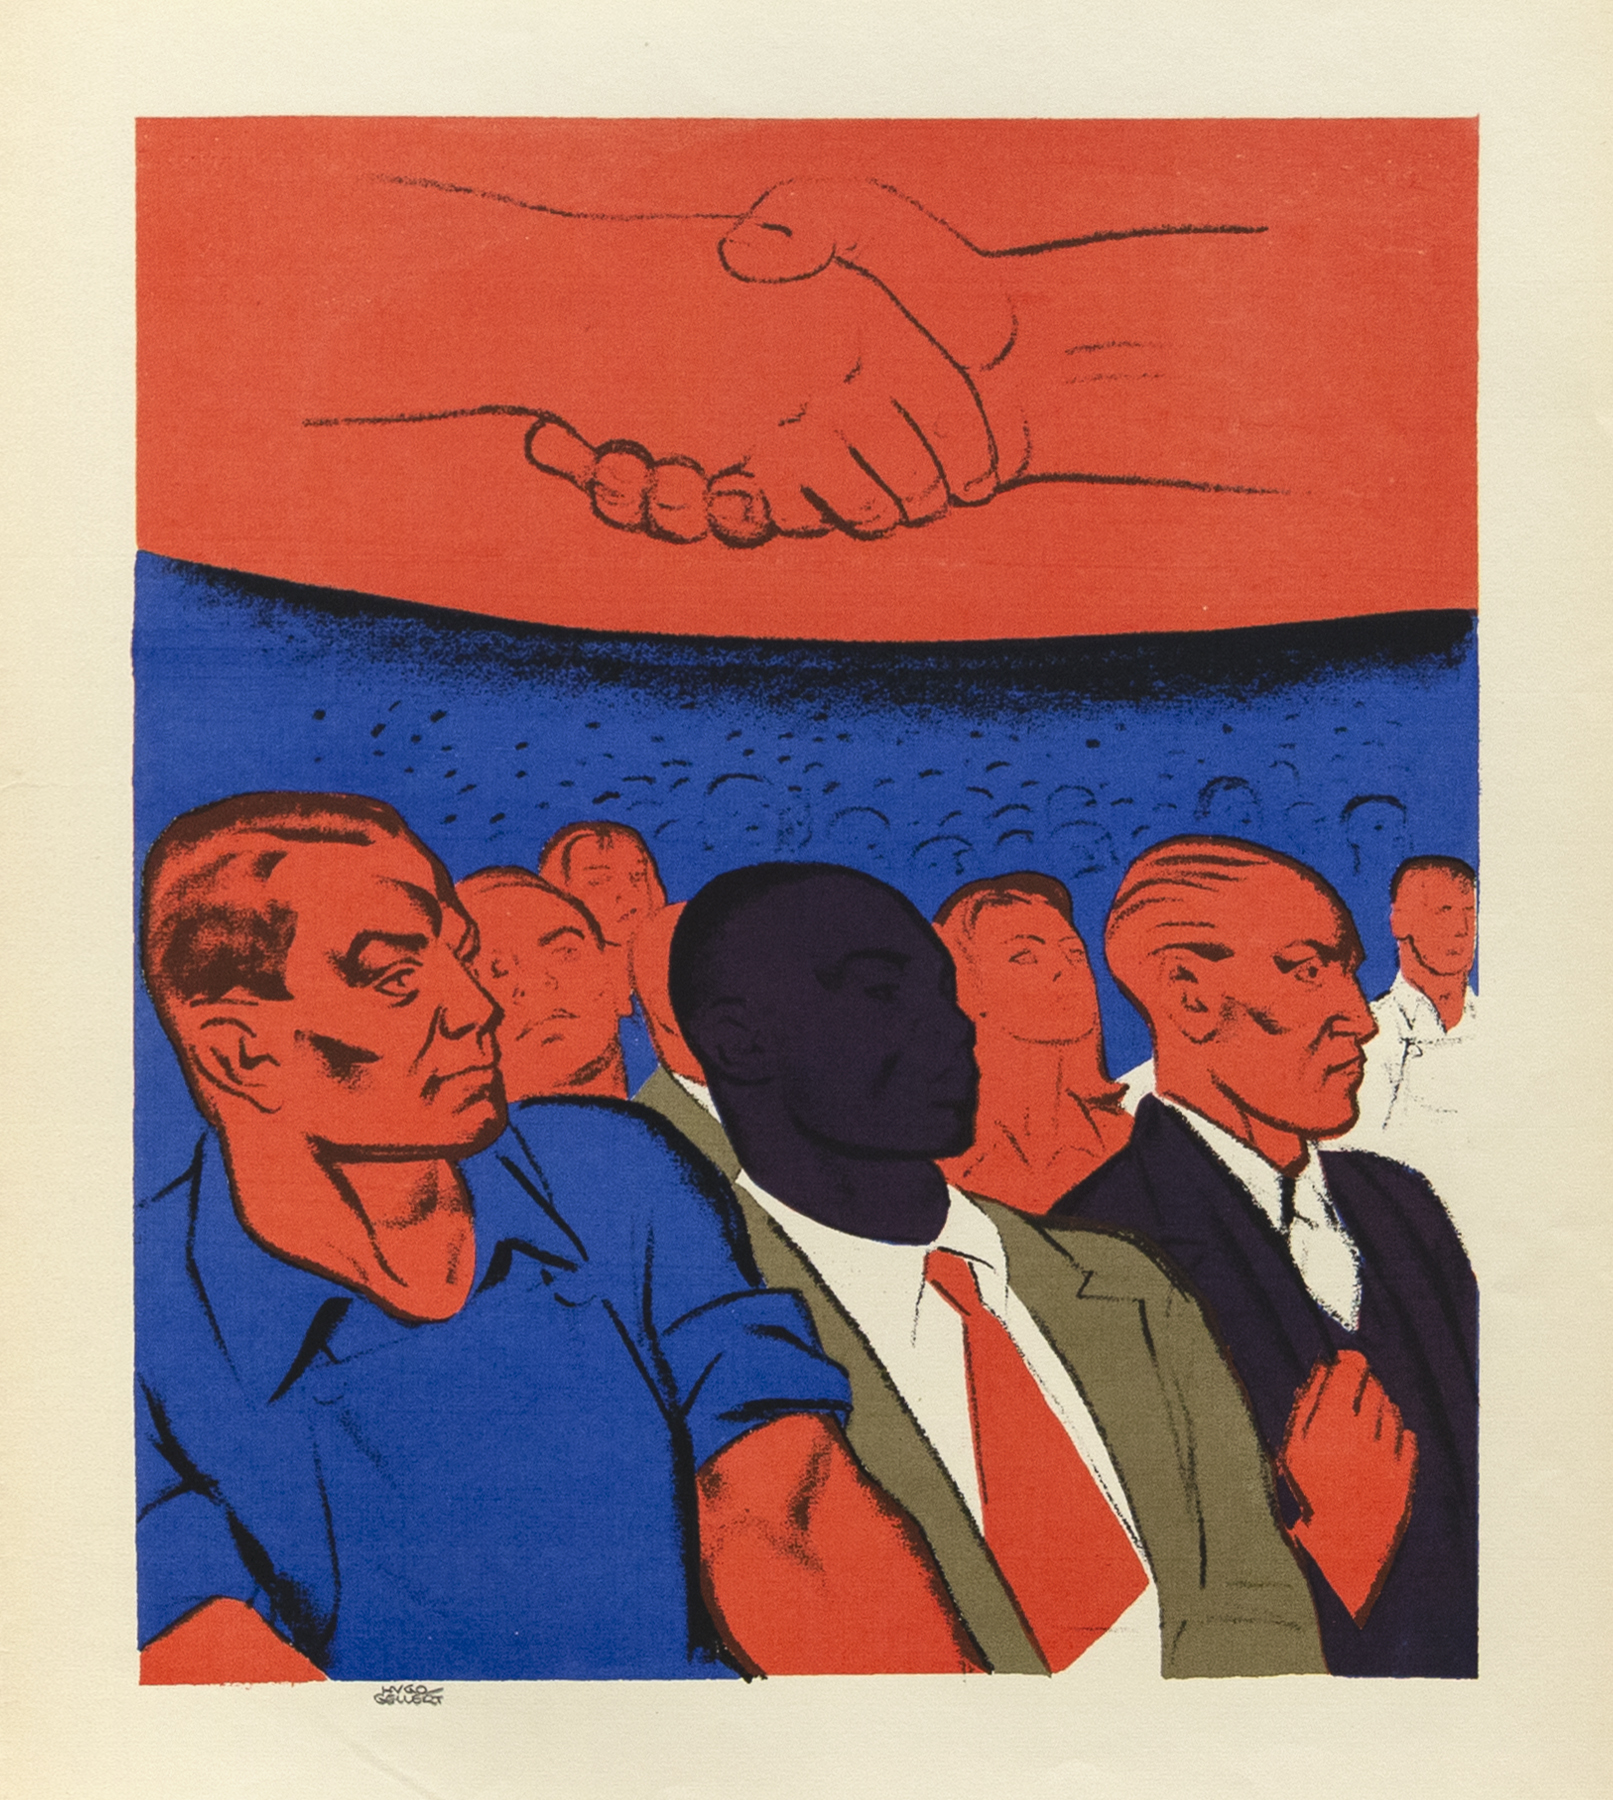 Learning to Think and Work Together, 1943, Silkscreen, 15 1/4 x 13 1/4 inches (38.7 x 33.7 cm), Edition of 54